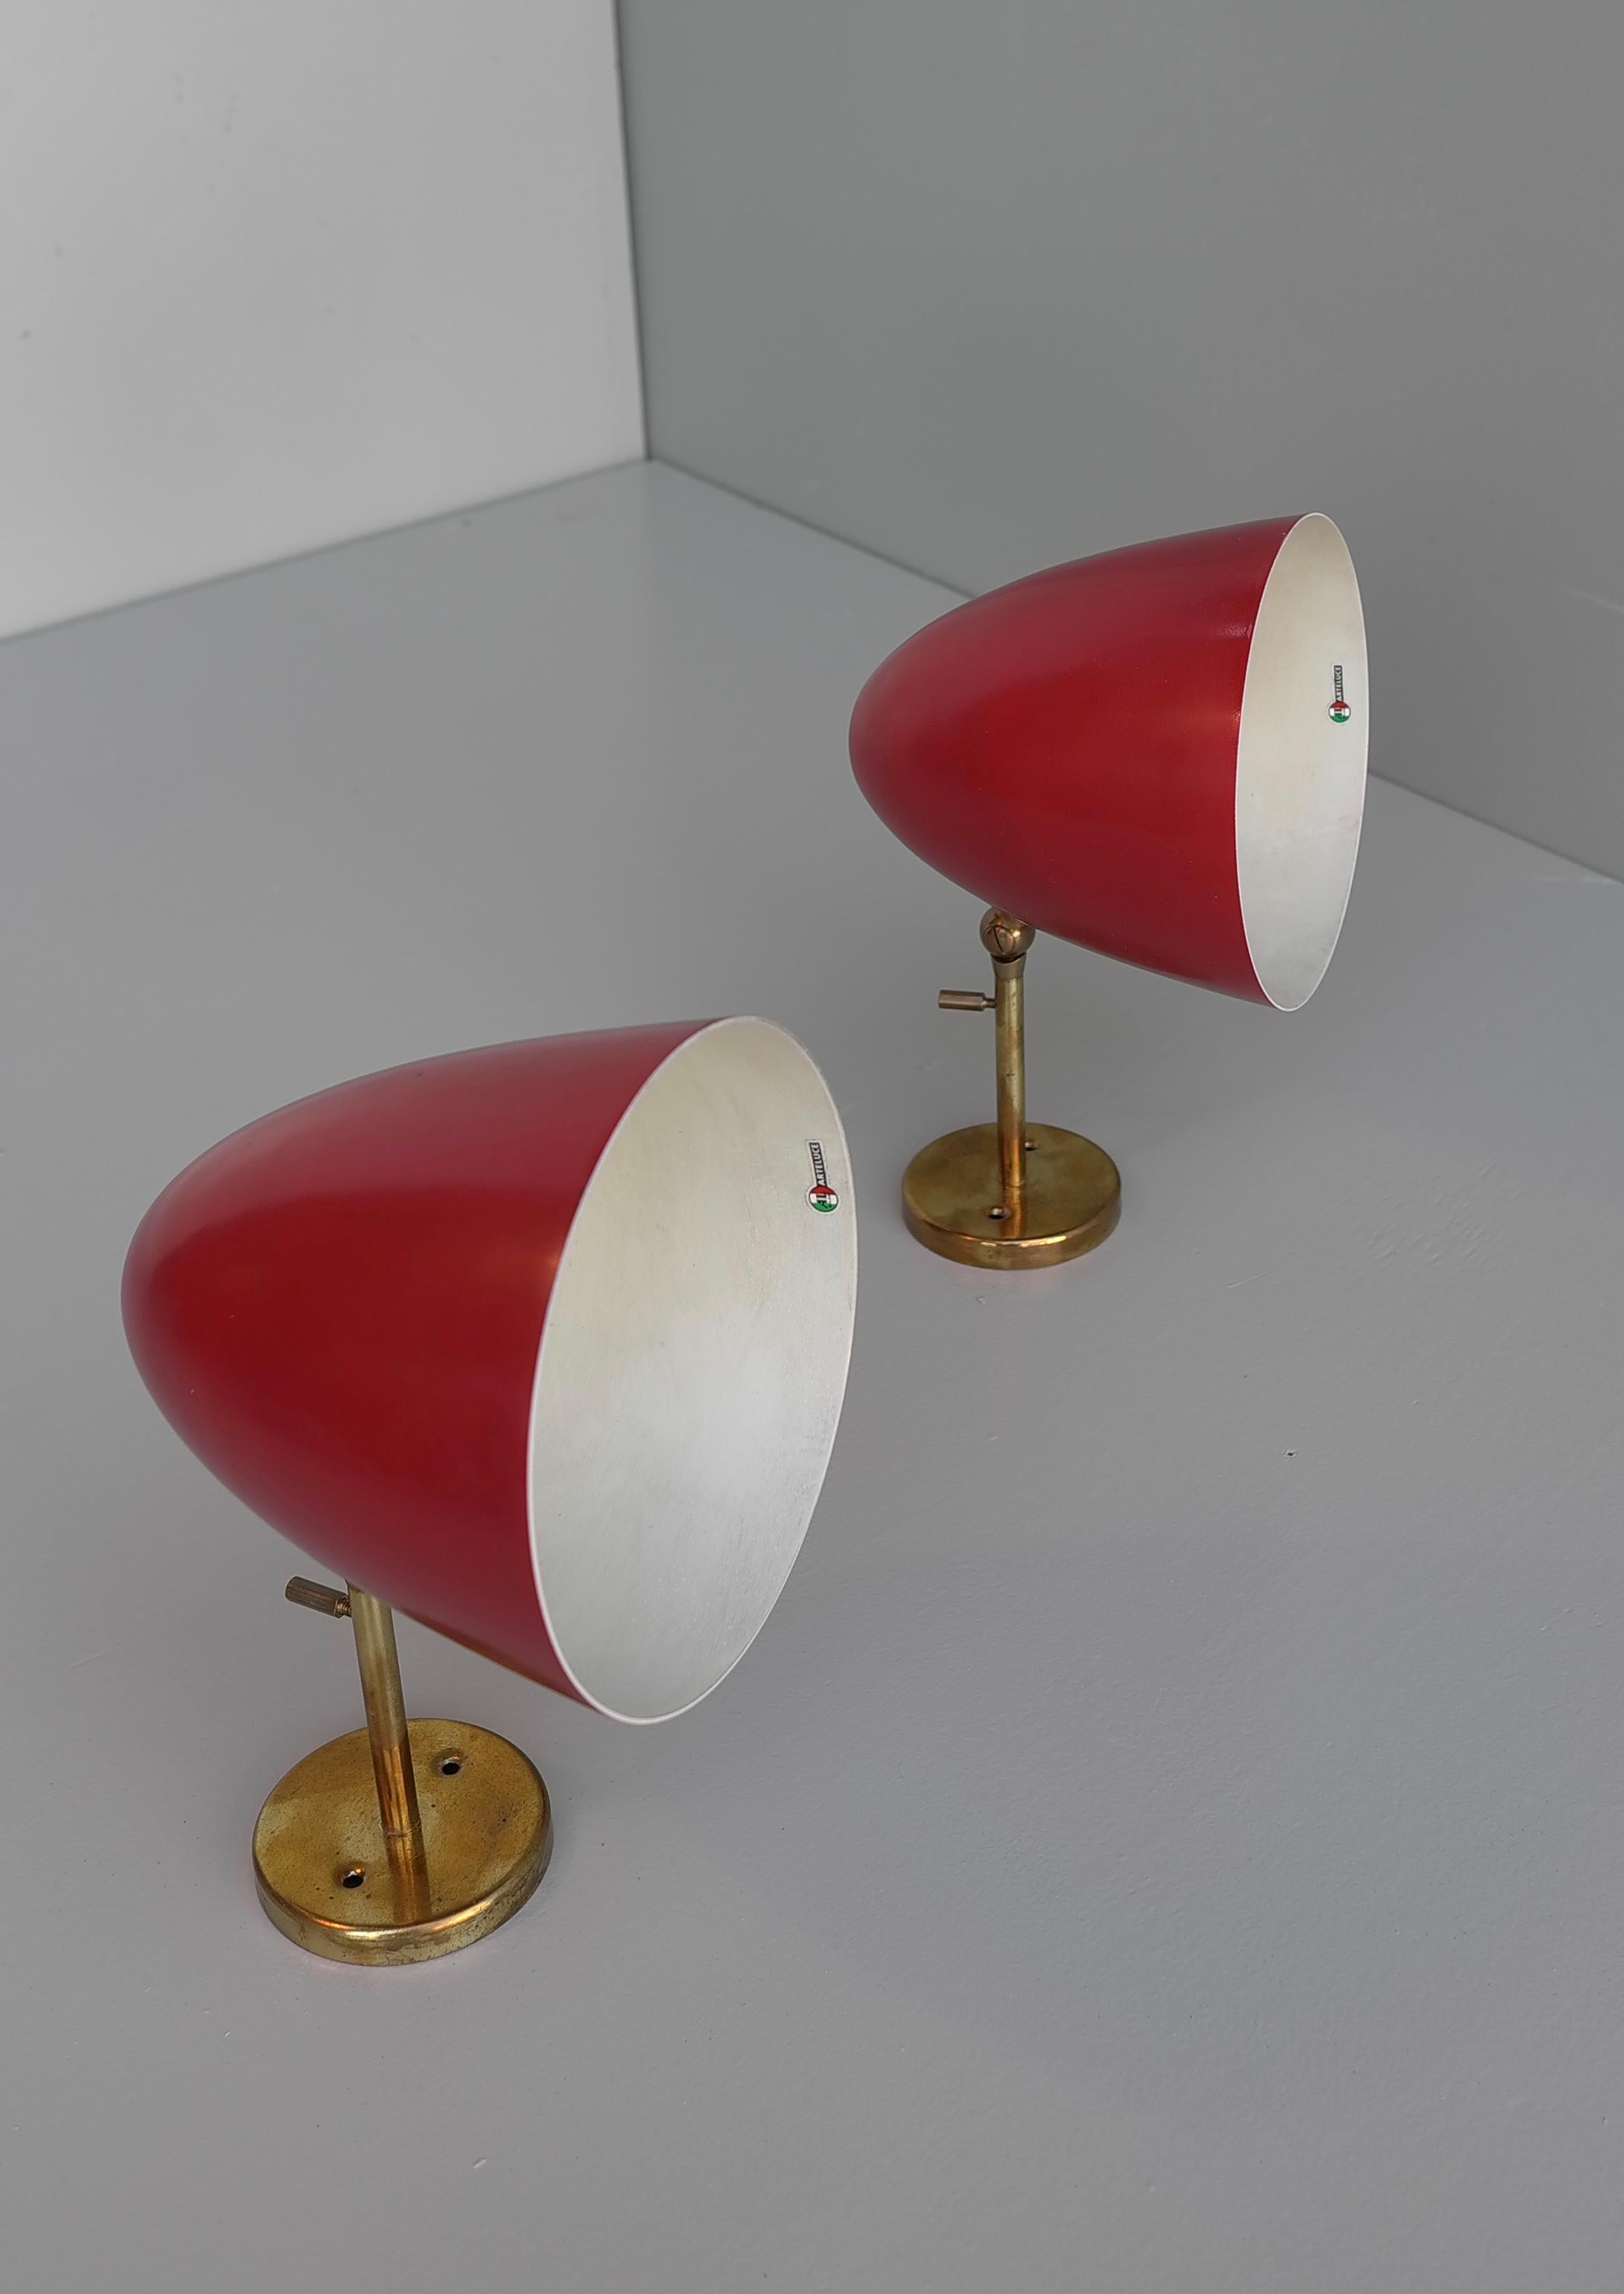 Rare pair of Gino Sarfatti red wall scones, Arteluce Italy, 1956
Enameled aluminum, brass. Adjustable in any position desired.


Gino Sarfatti: Opere Scelte 1938-1973 Selected Works, Romanelli and Severi, pg. 388